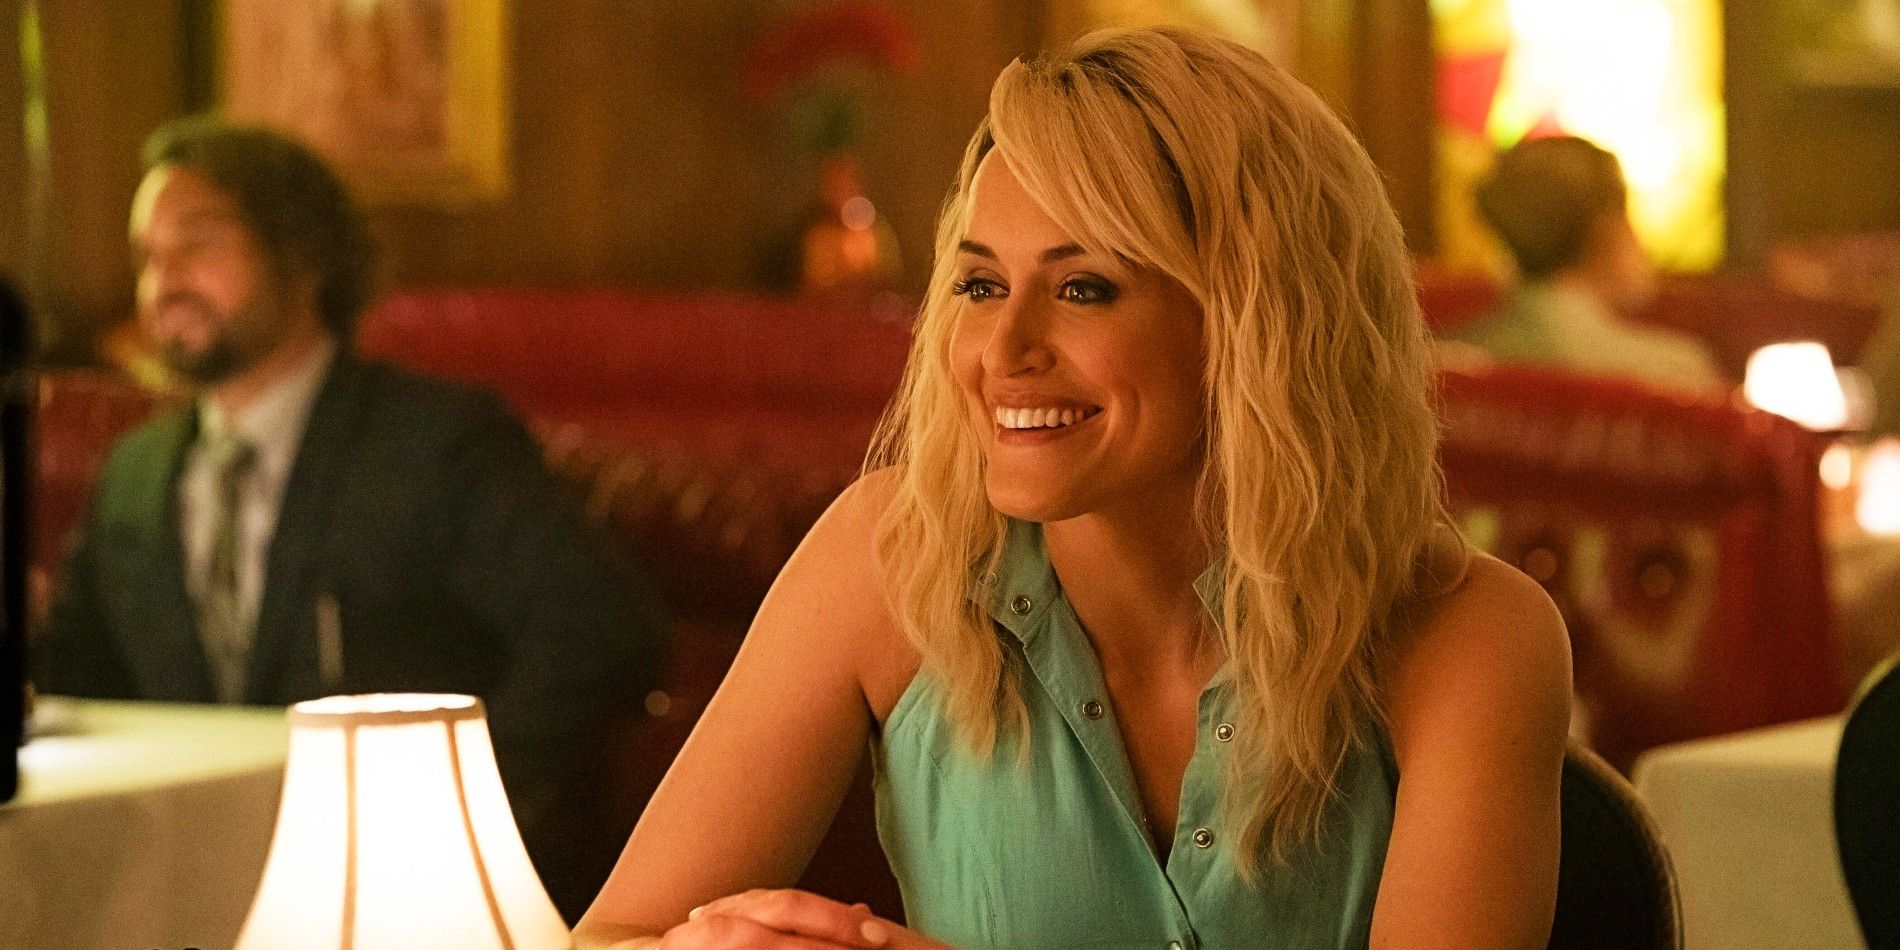 Taylor Schilling as Erica in Pam and Tommy